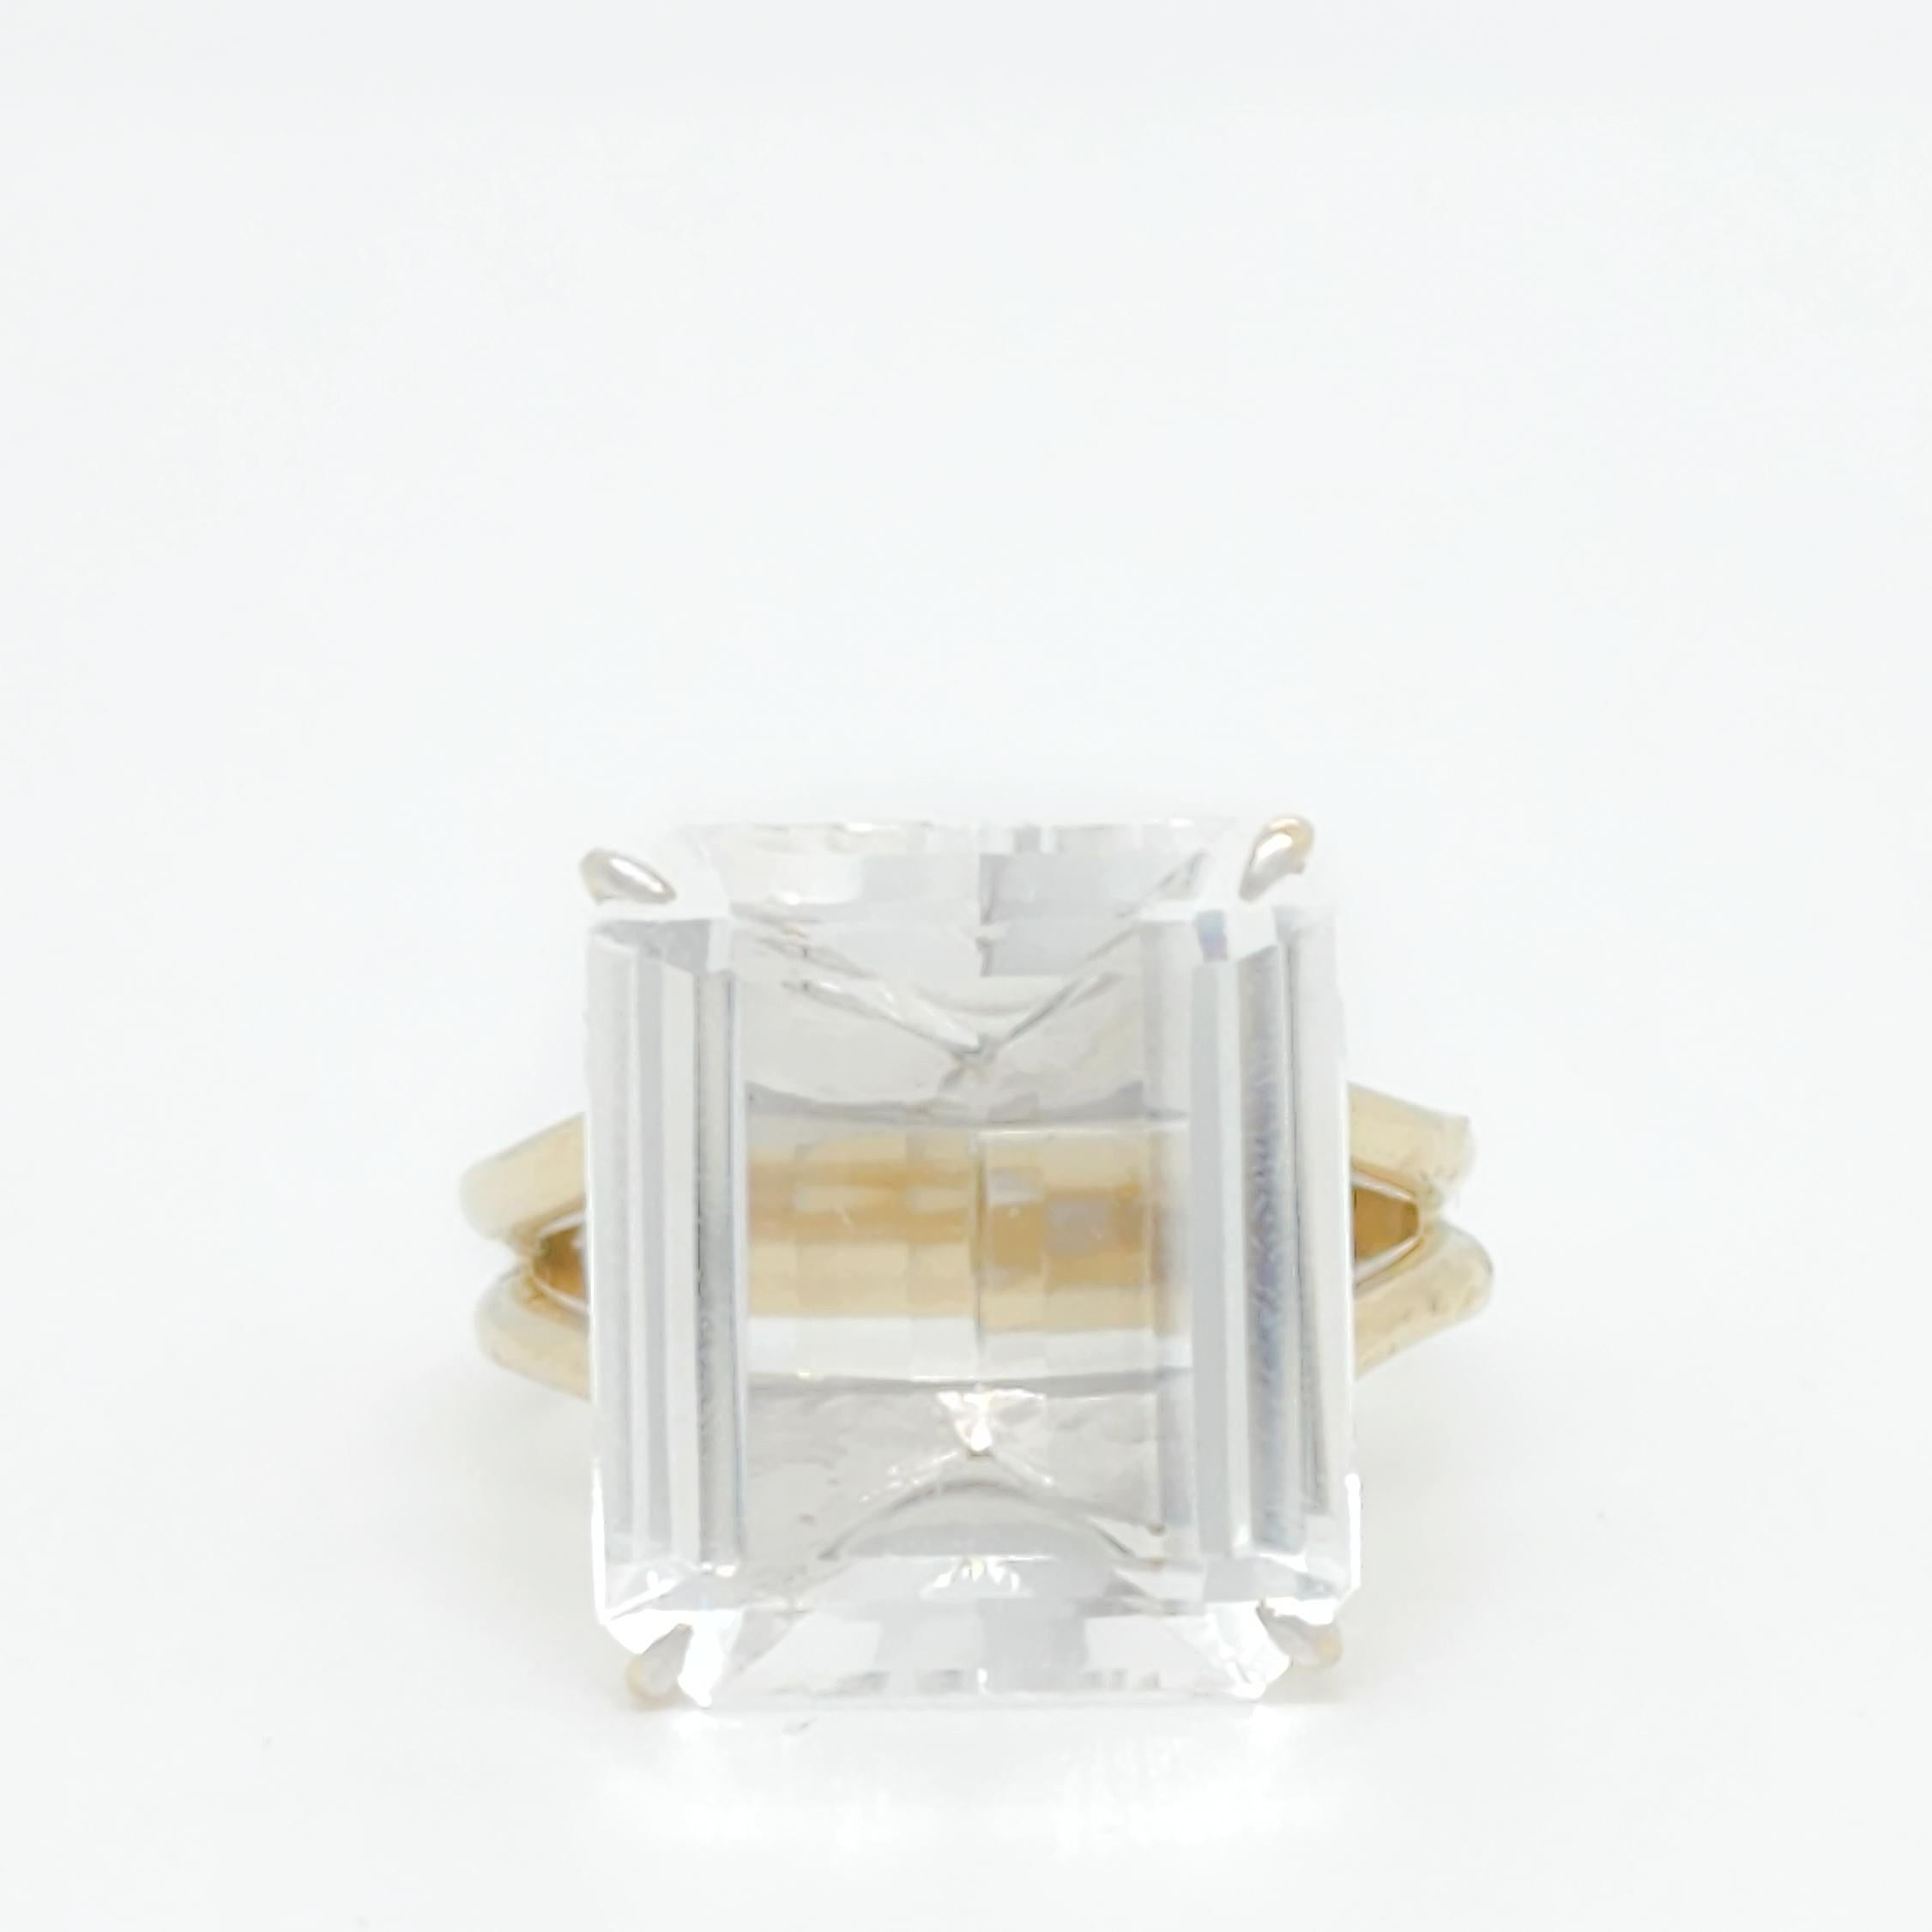 Beautiful H. Stern cocktail ring with a big emerald cut white crystal.  Handmade in 18k yellow gold.  Ring size 7.75.